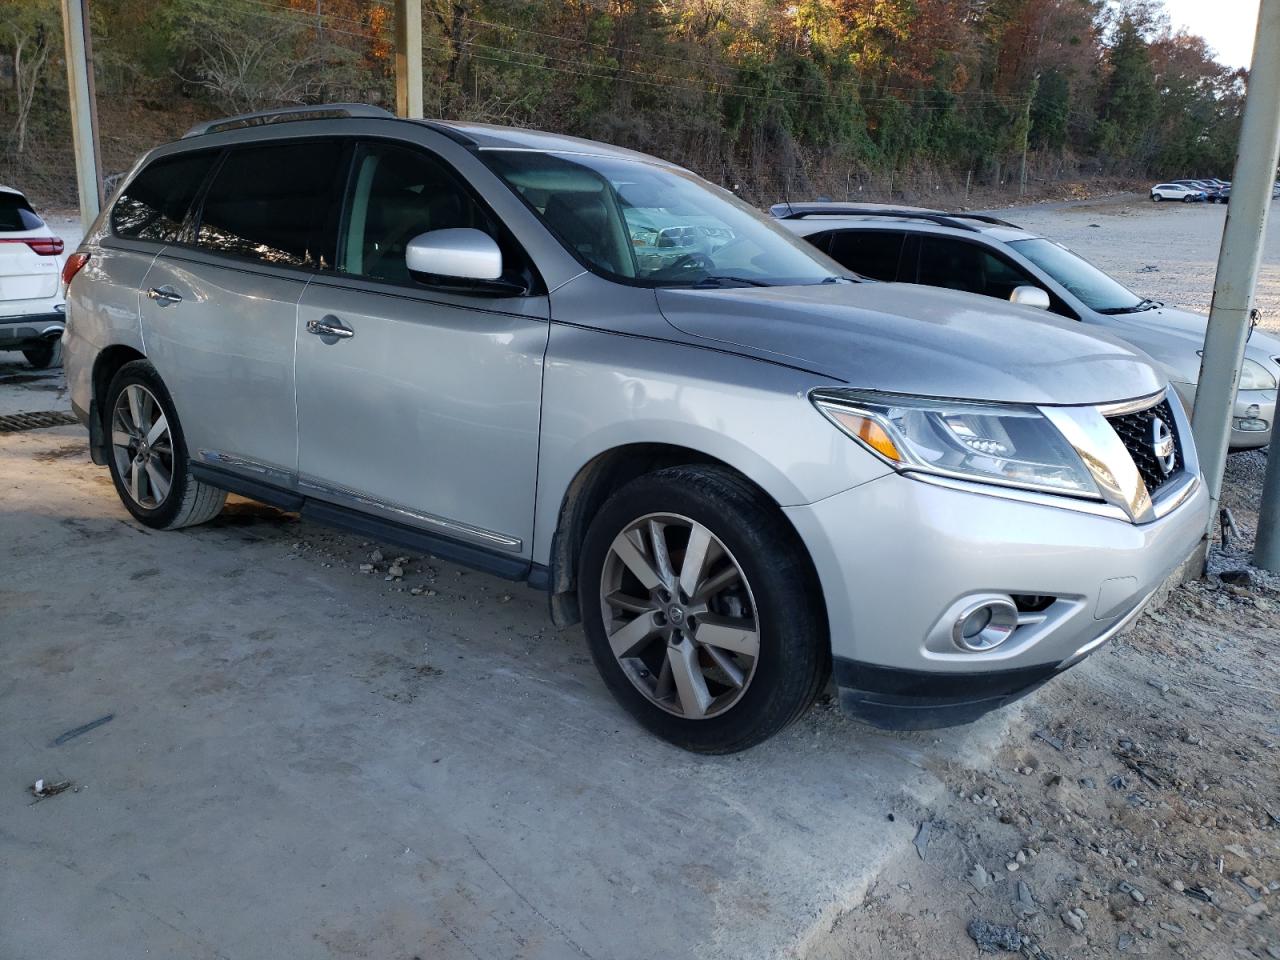 5N1AR2MN1EC****** Salvage and Wrecked 2014 Nissan Pathfinder in Alabama State